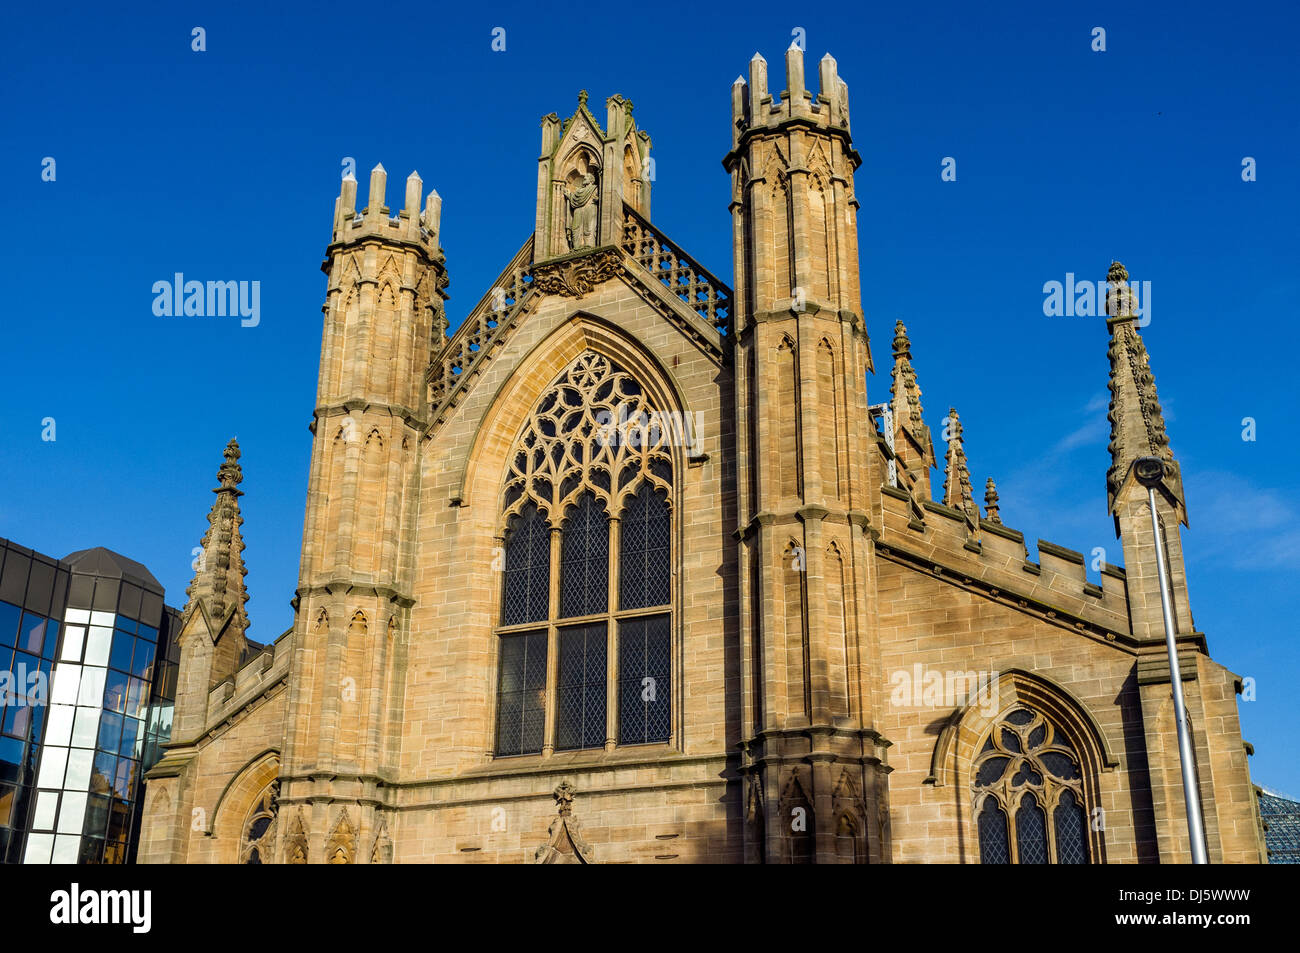 Front facade of the Metropolitan Cathedral, Church of St Andrews, Clyde Street, Glasgow, Scotland, Great Britain Stock Photo